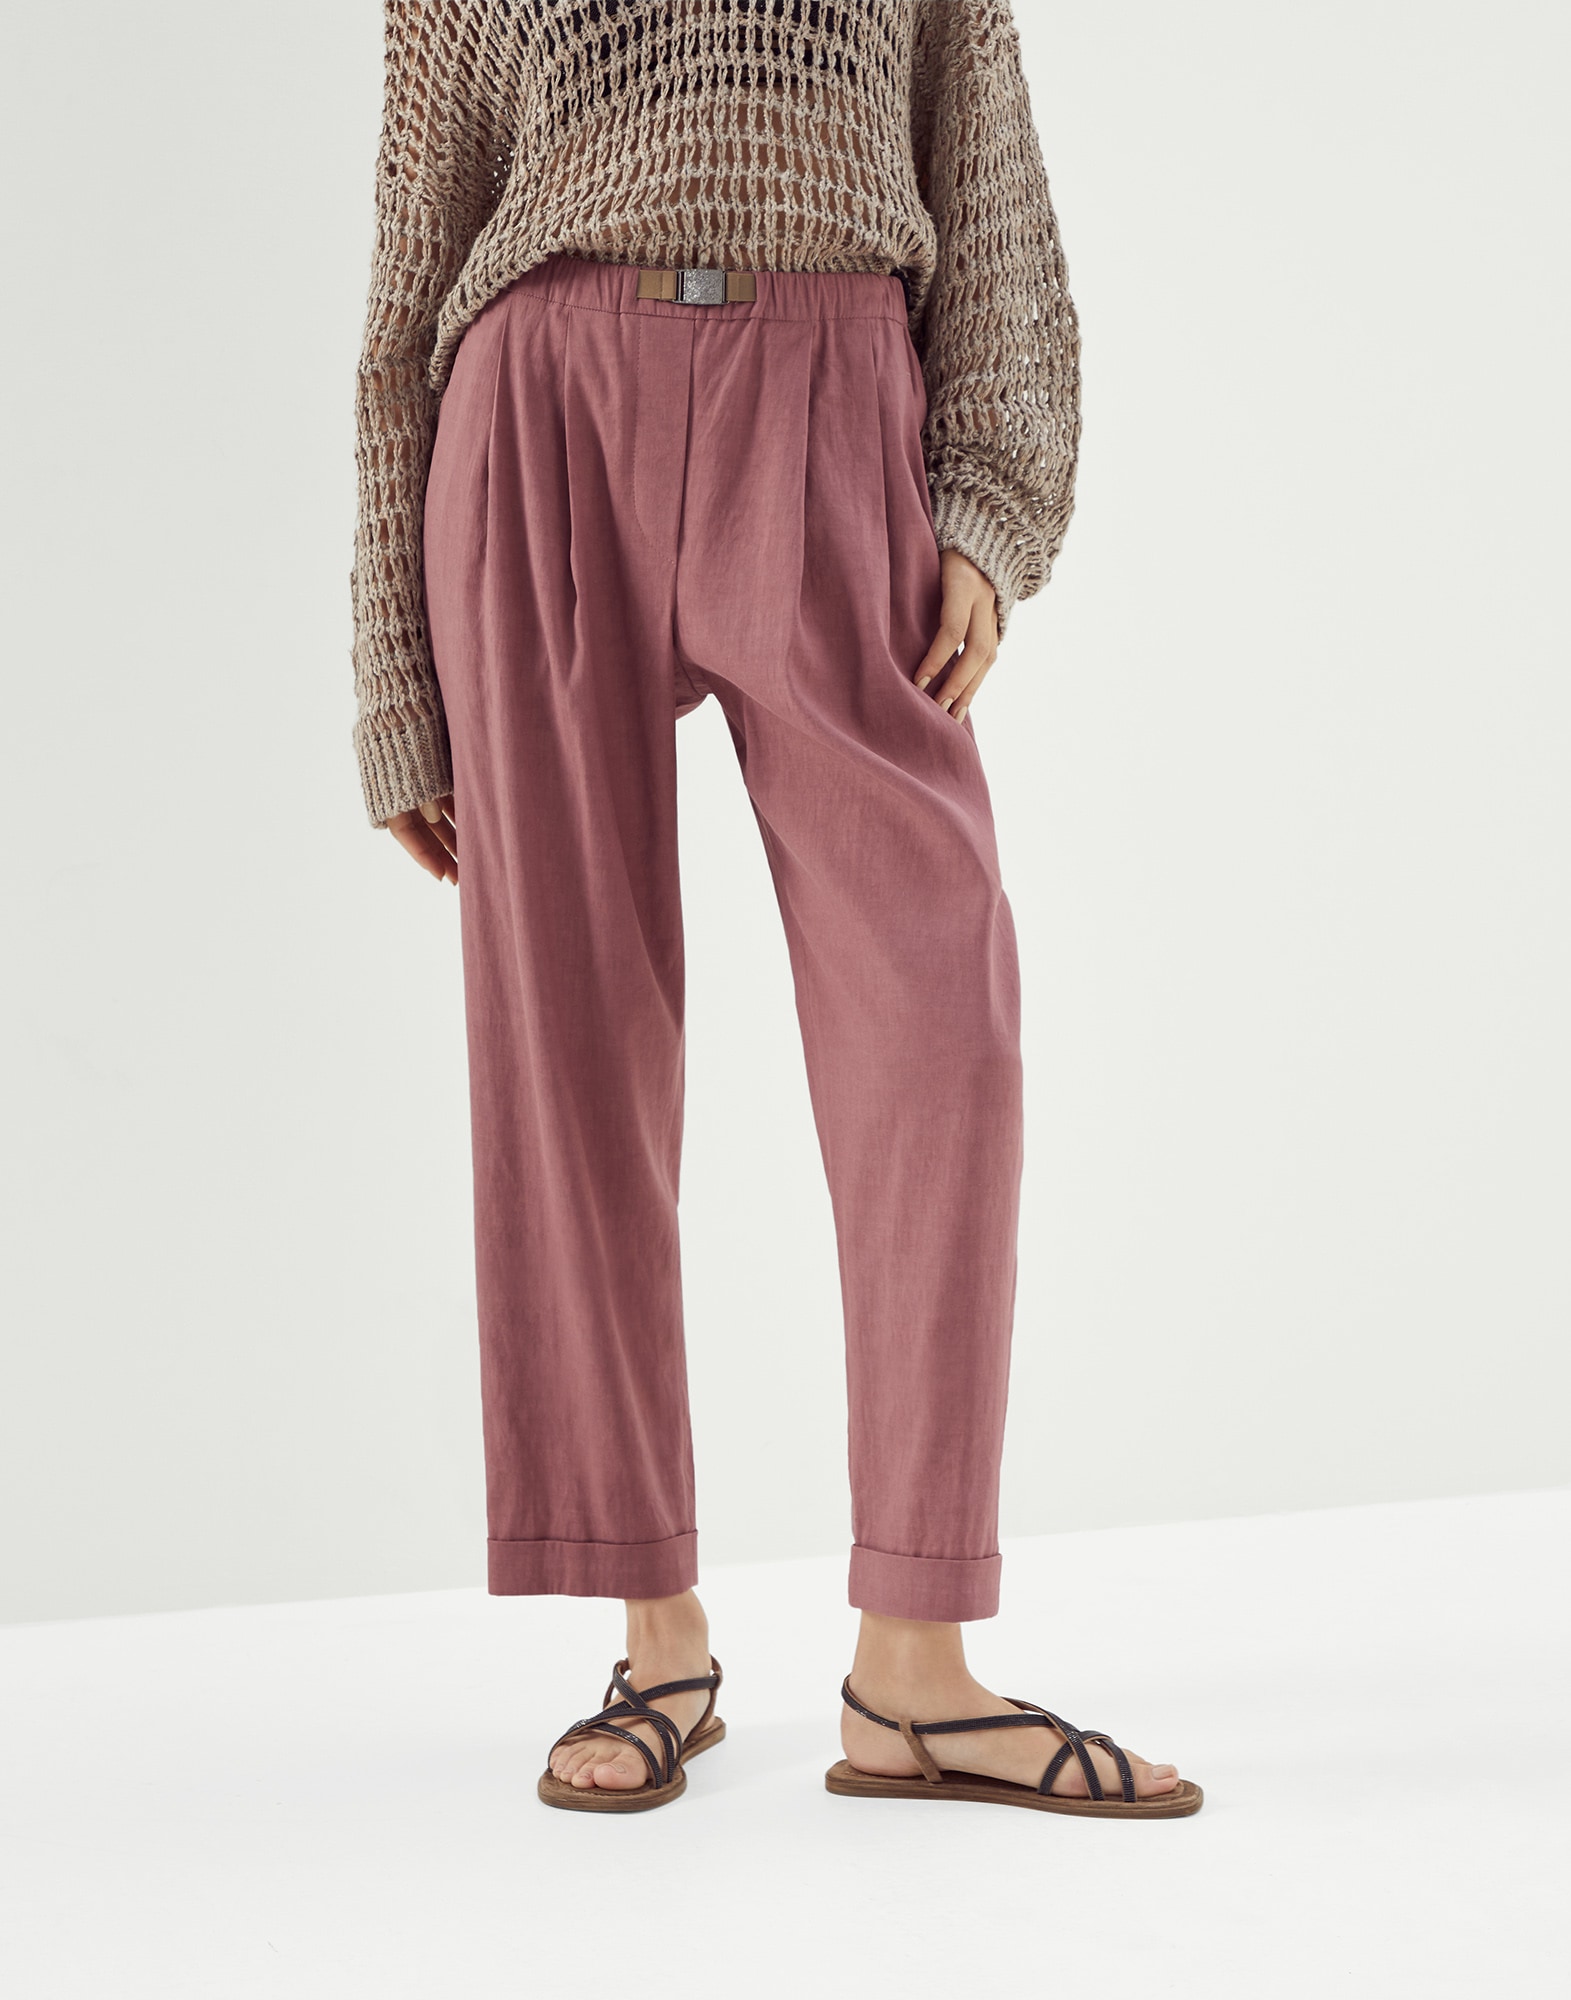 Sartorial track trousers